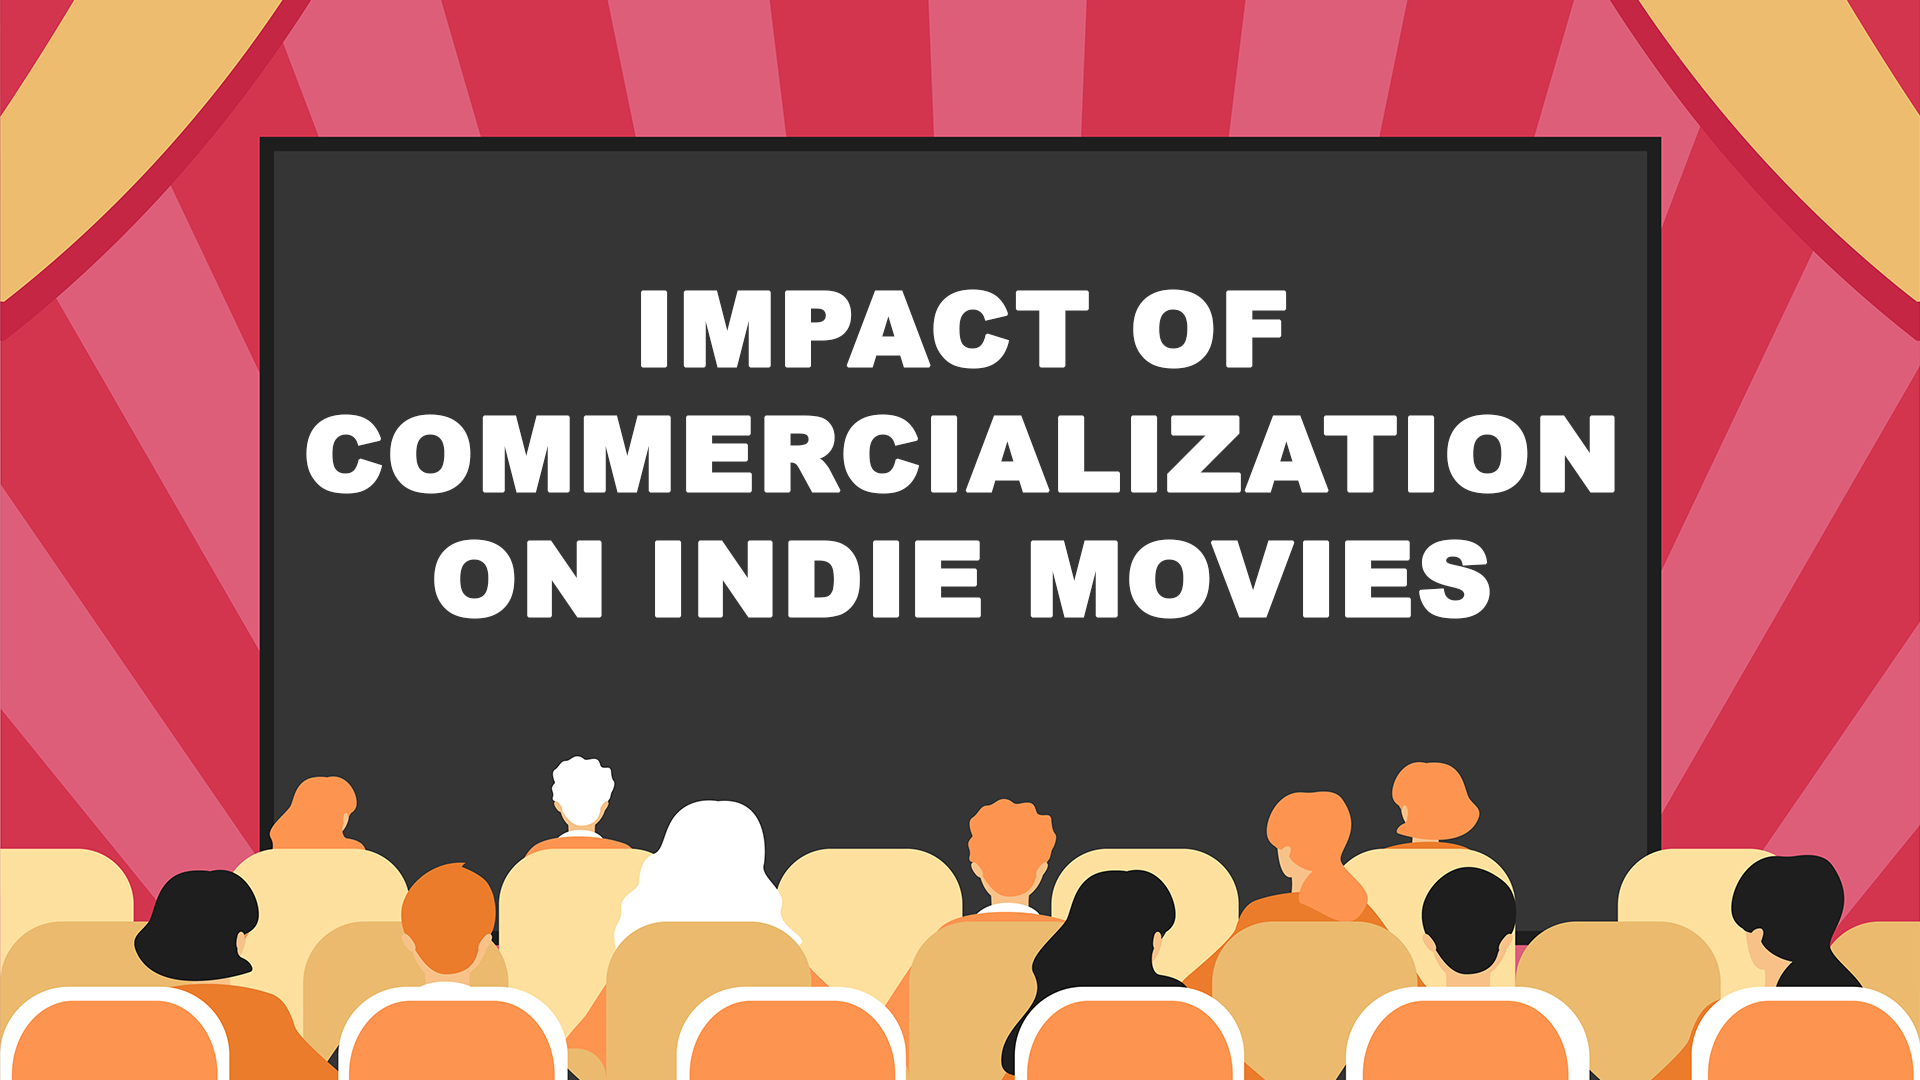 How are Indie Movies affected by commercialization?